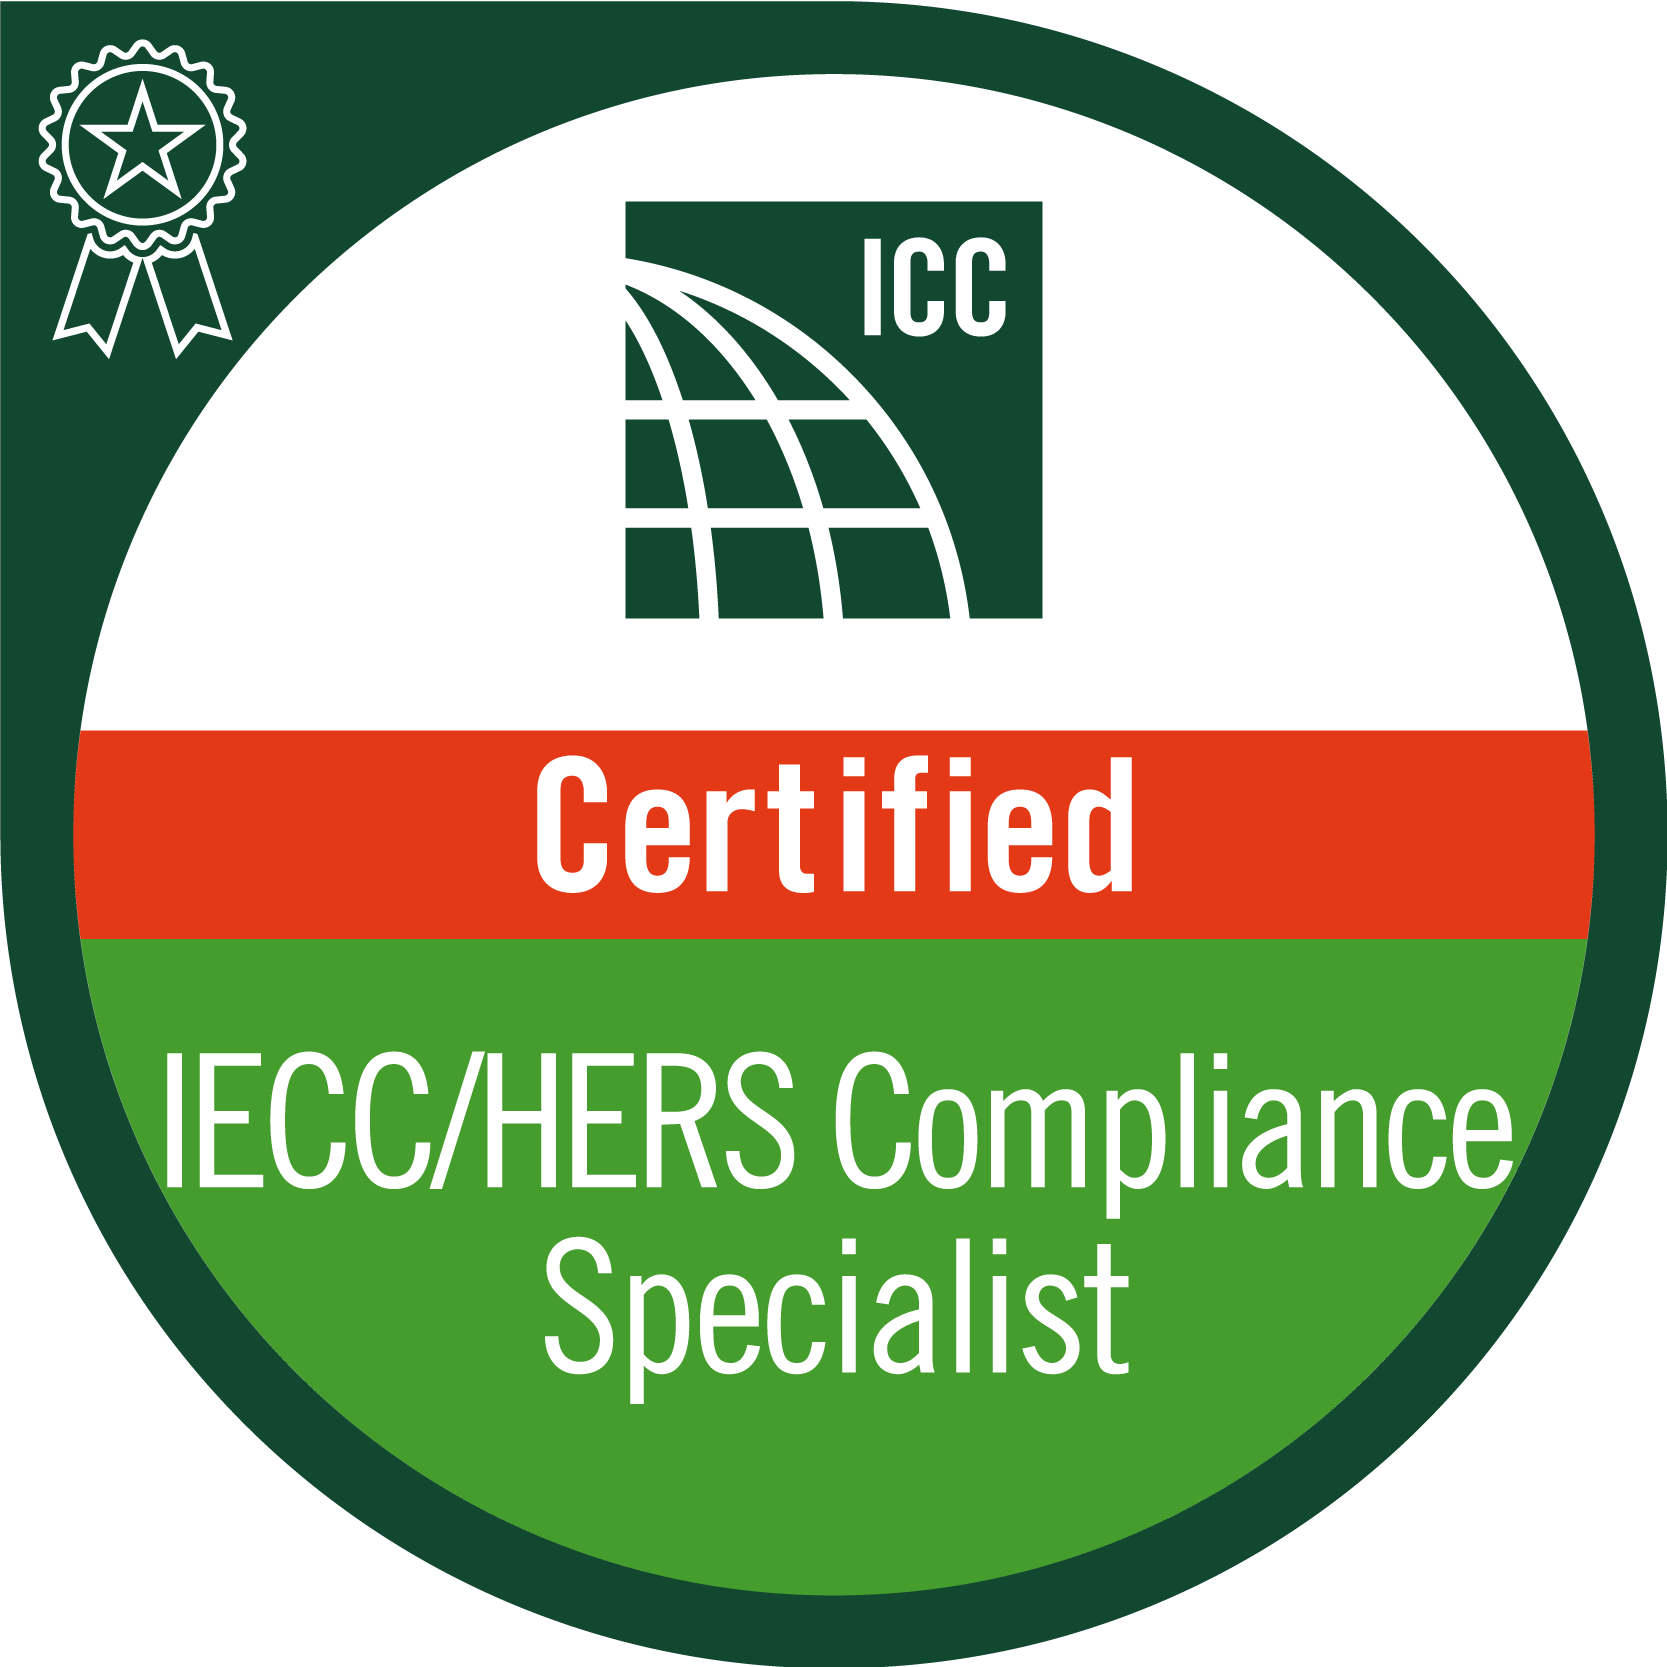 ICC HERS Compliance Specialist Badge